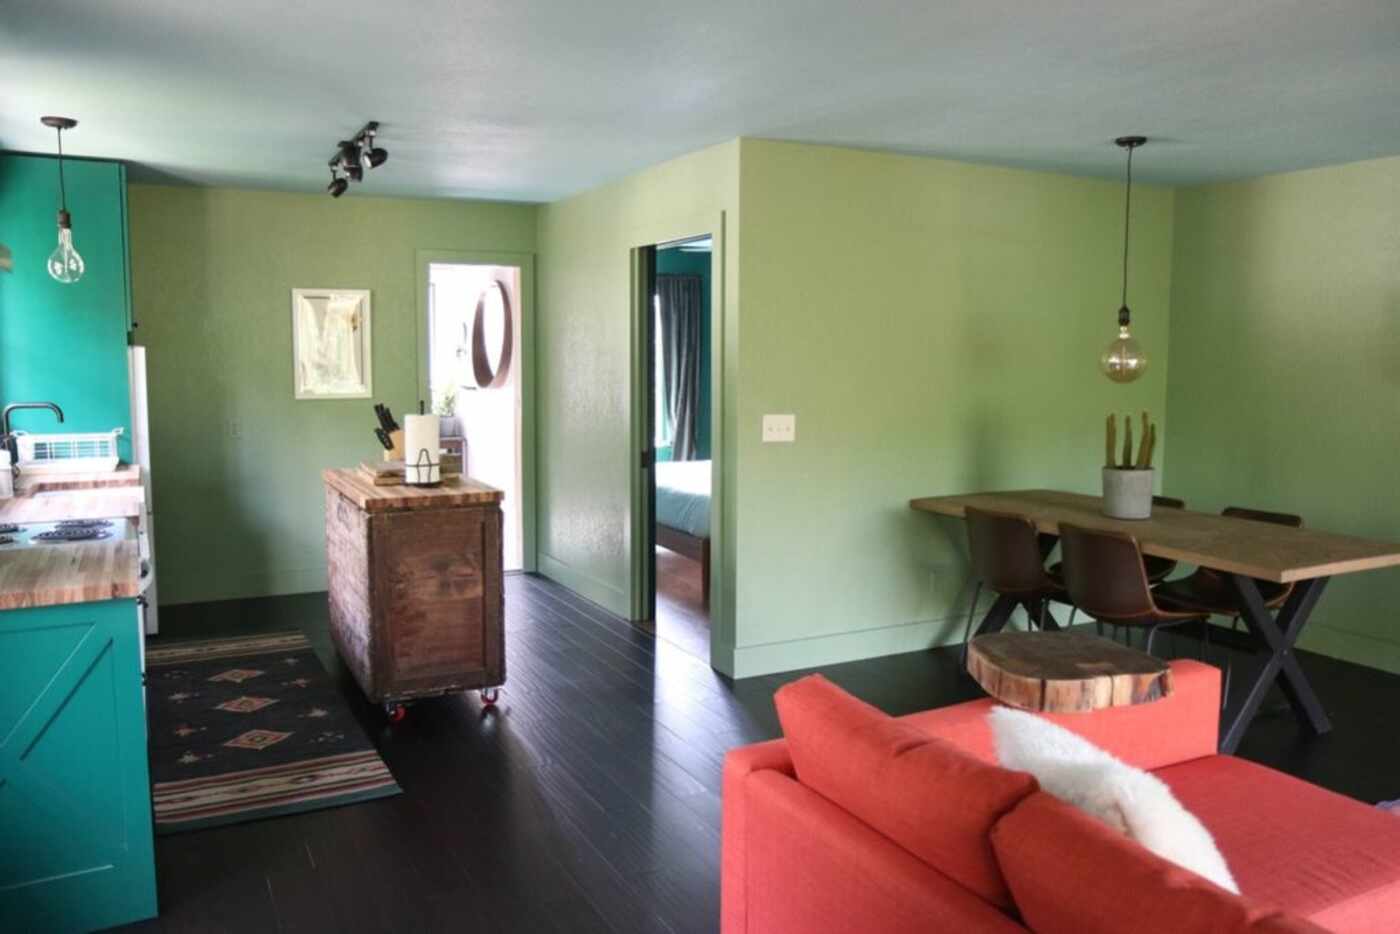 A look at the The Green Escape on the Devil's Backbone listing on VRBO.